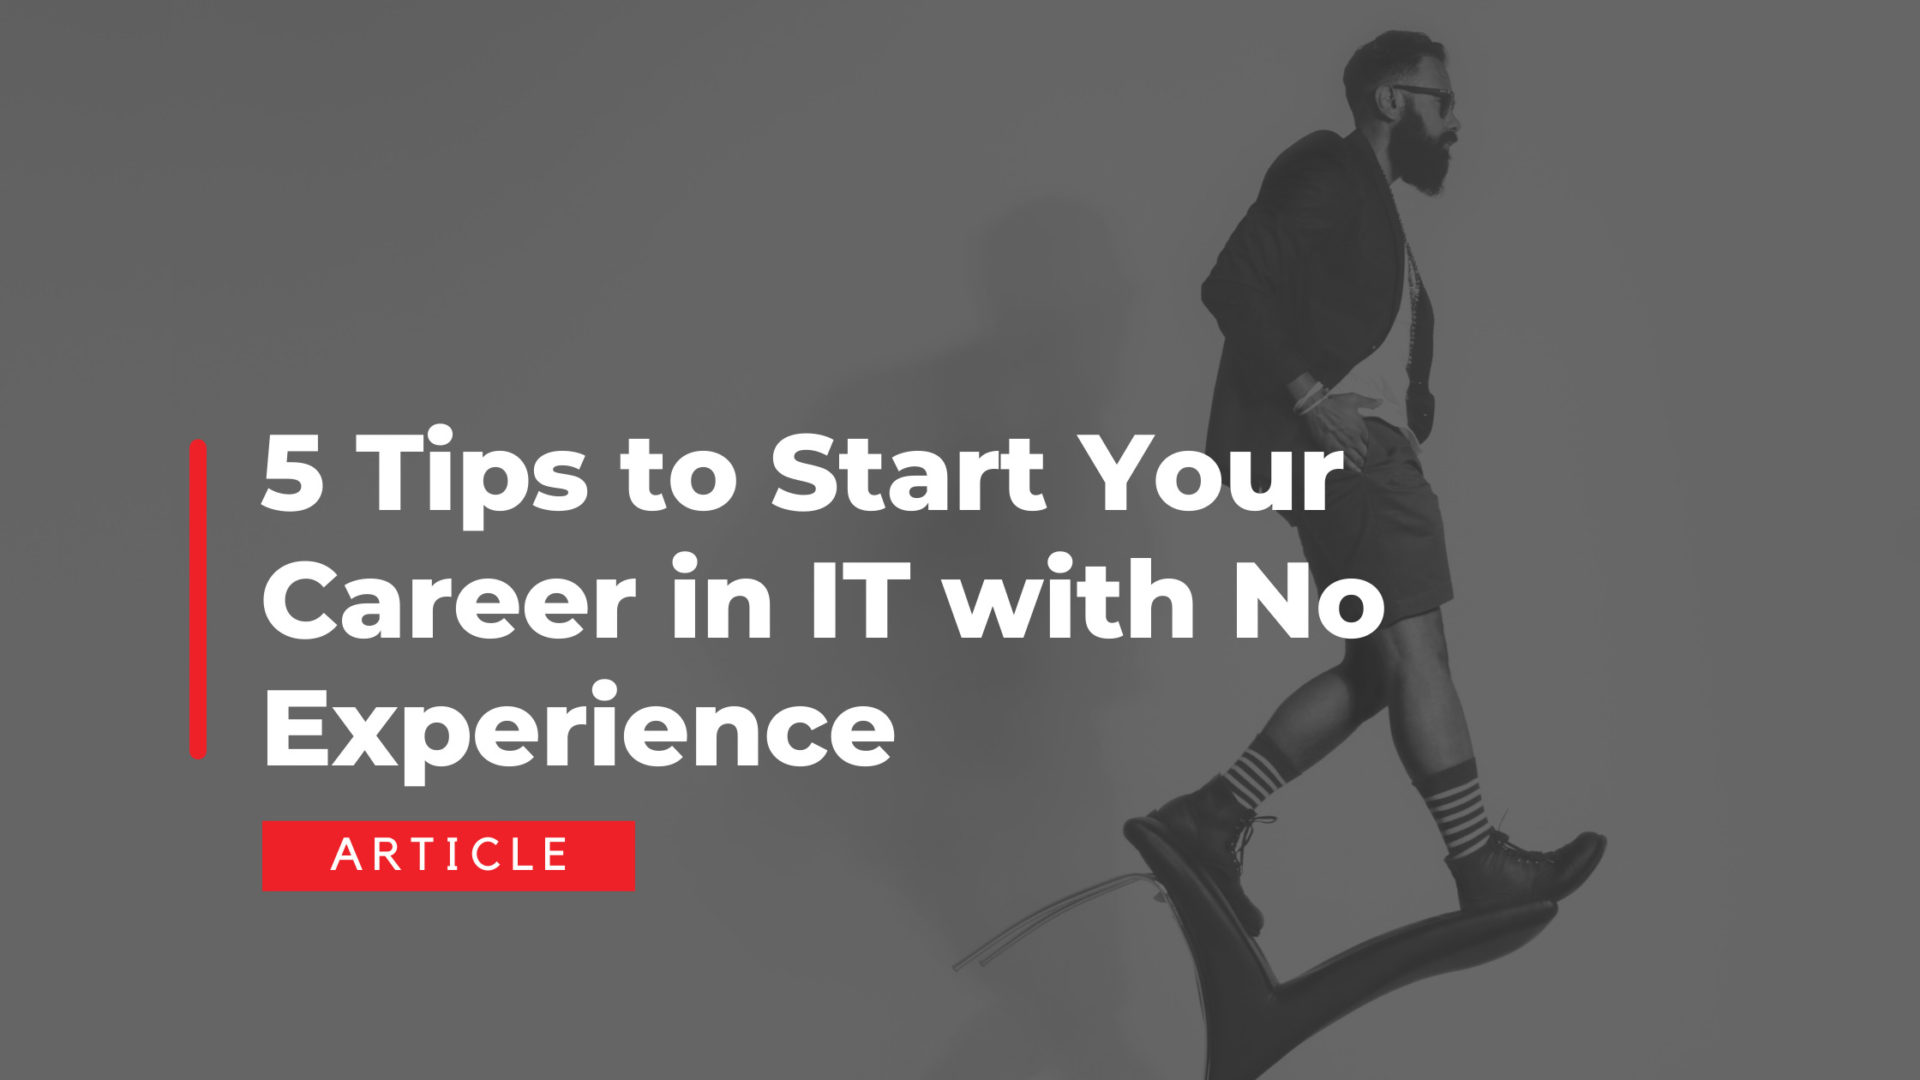 5 Tips to Start Your Career in IT with No Experience